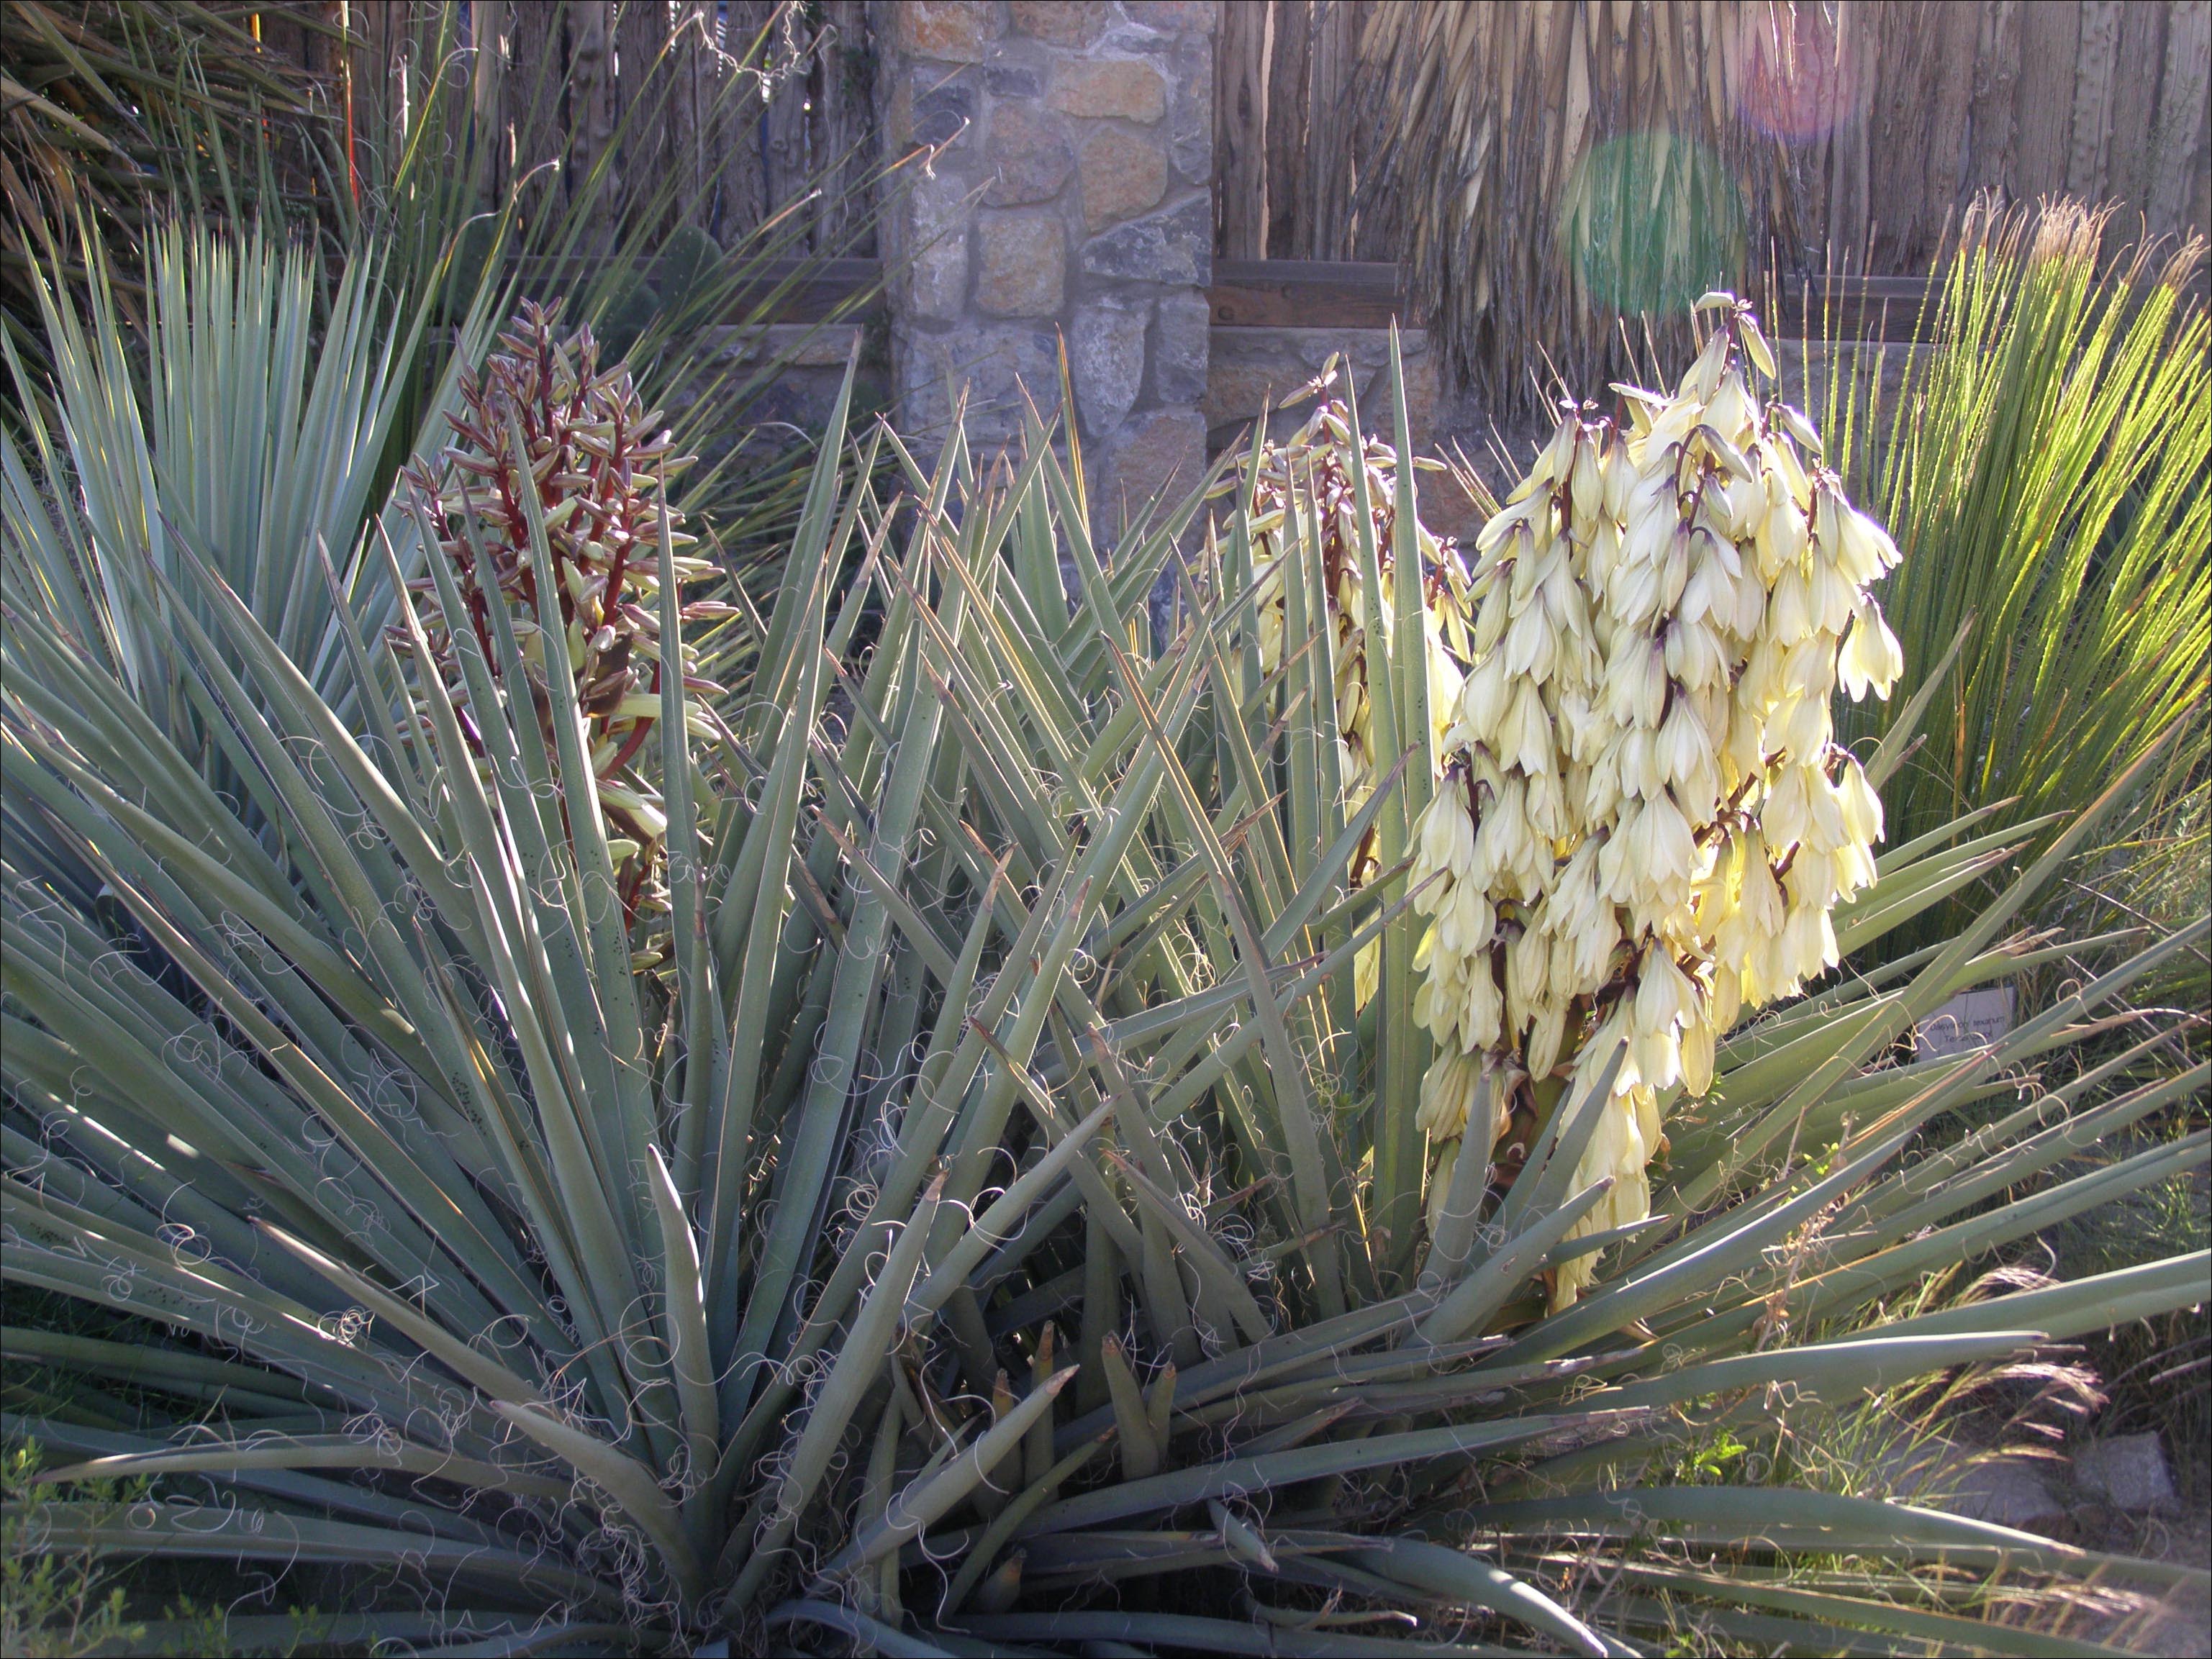 Overview of Yucca baccata